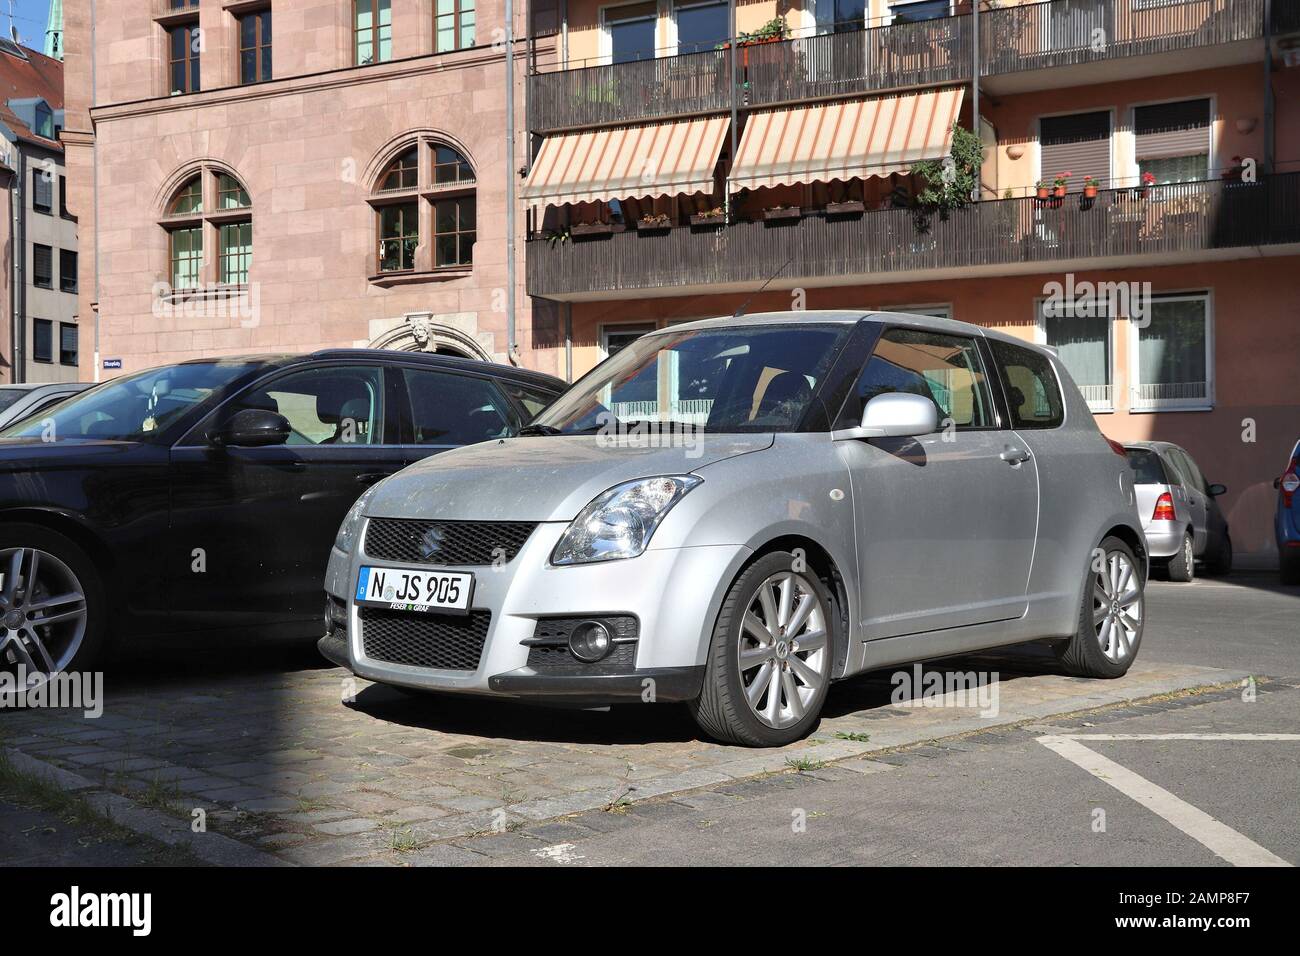 NUREMBERG, GERMANY - MAY 6, 2018: Silver Suzuki Swift compact hatchback car parked in Germany. There were 45.8 million cars registered in Germany (as Stock Photo